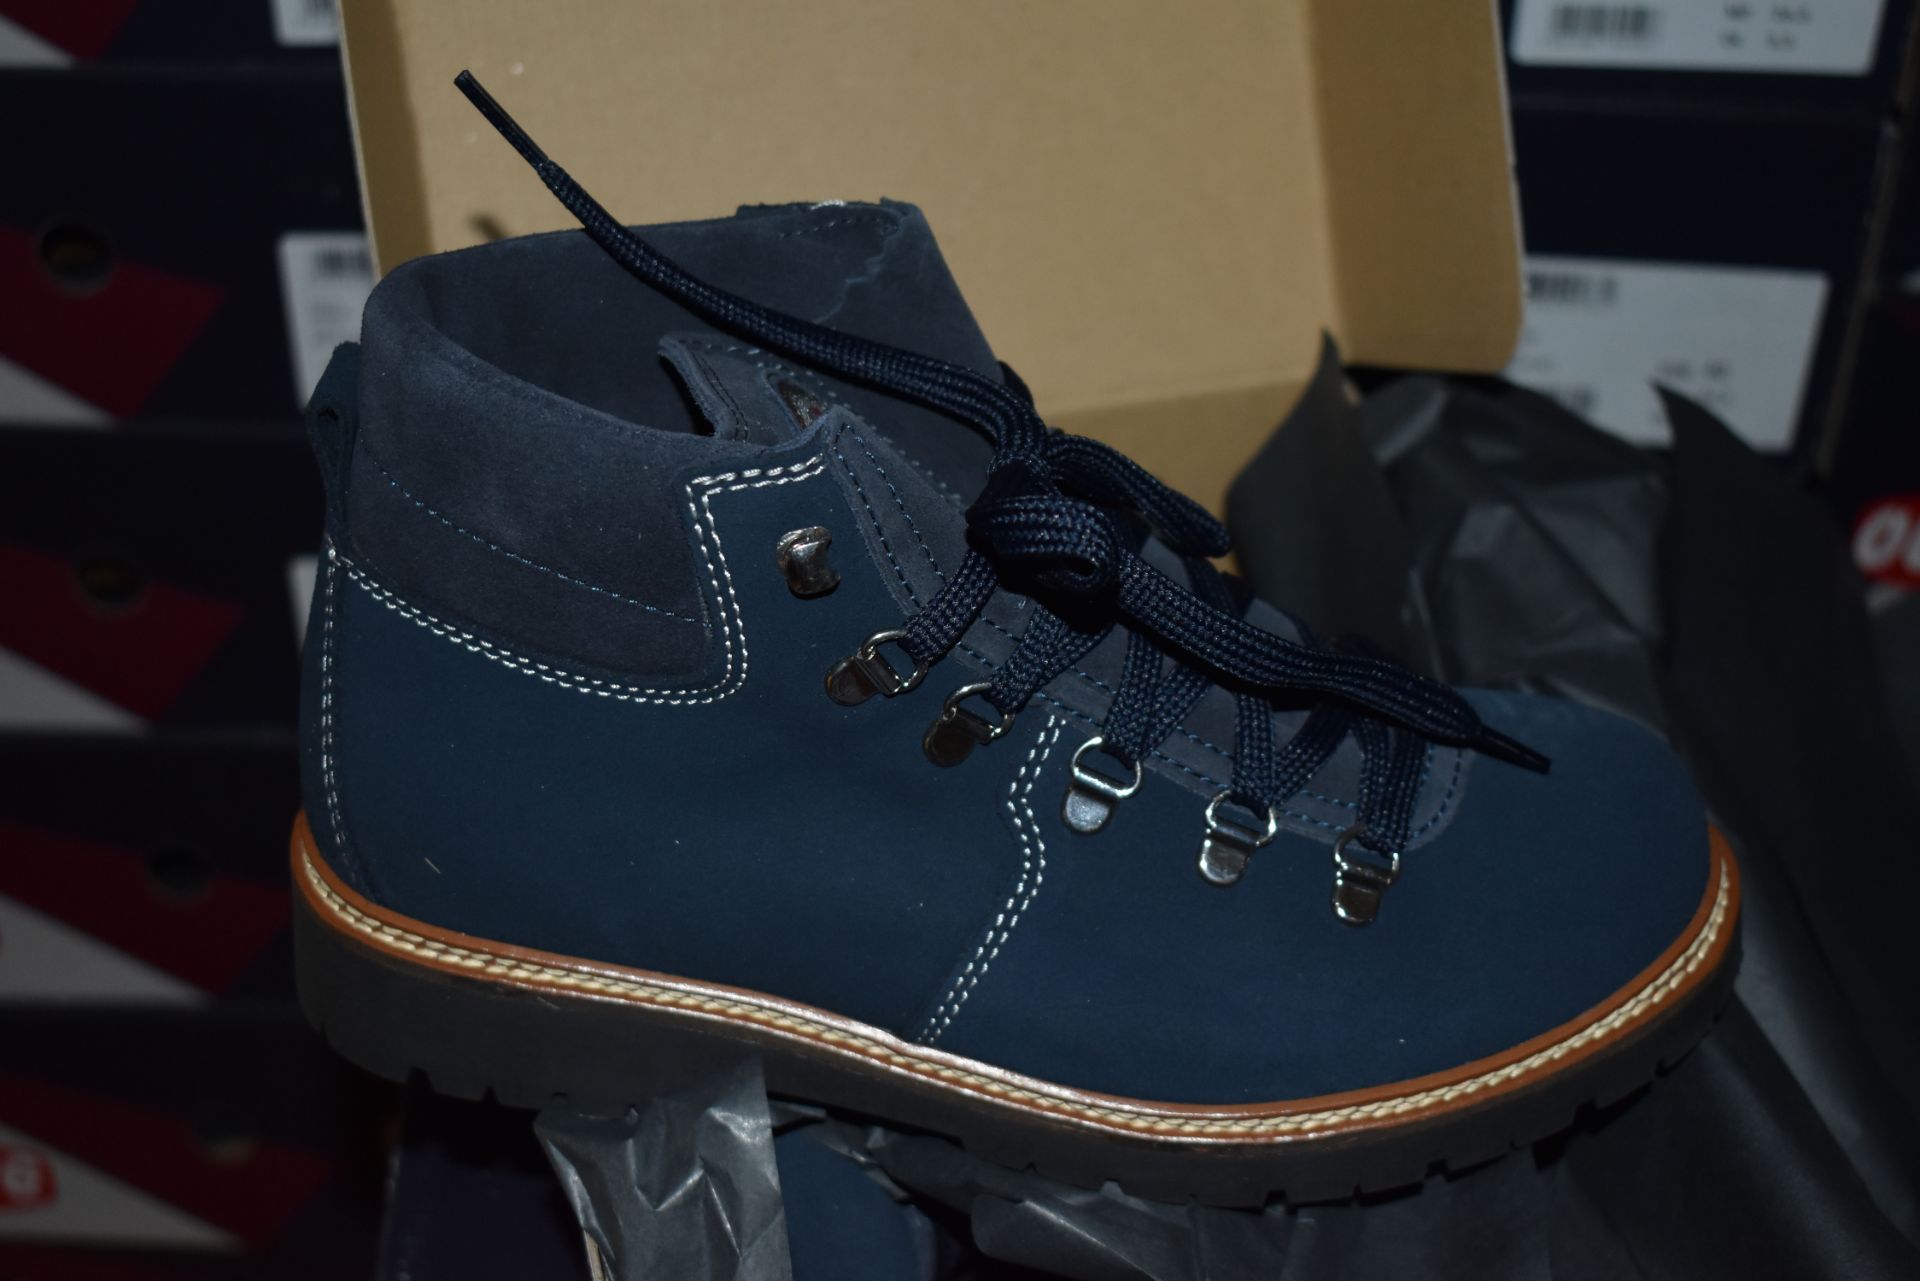 1 x Pair of Designer Olang Merano 82 Blu Women's Winter Boots - Euro Size 39 - Brand New Boxed Stock - Image 3 of 4